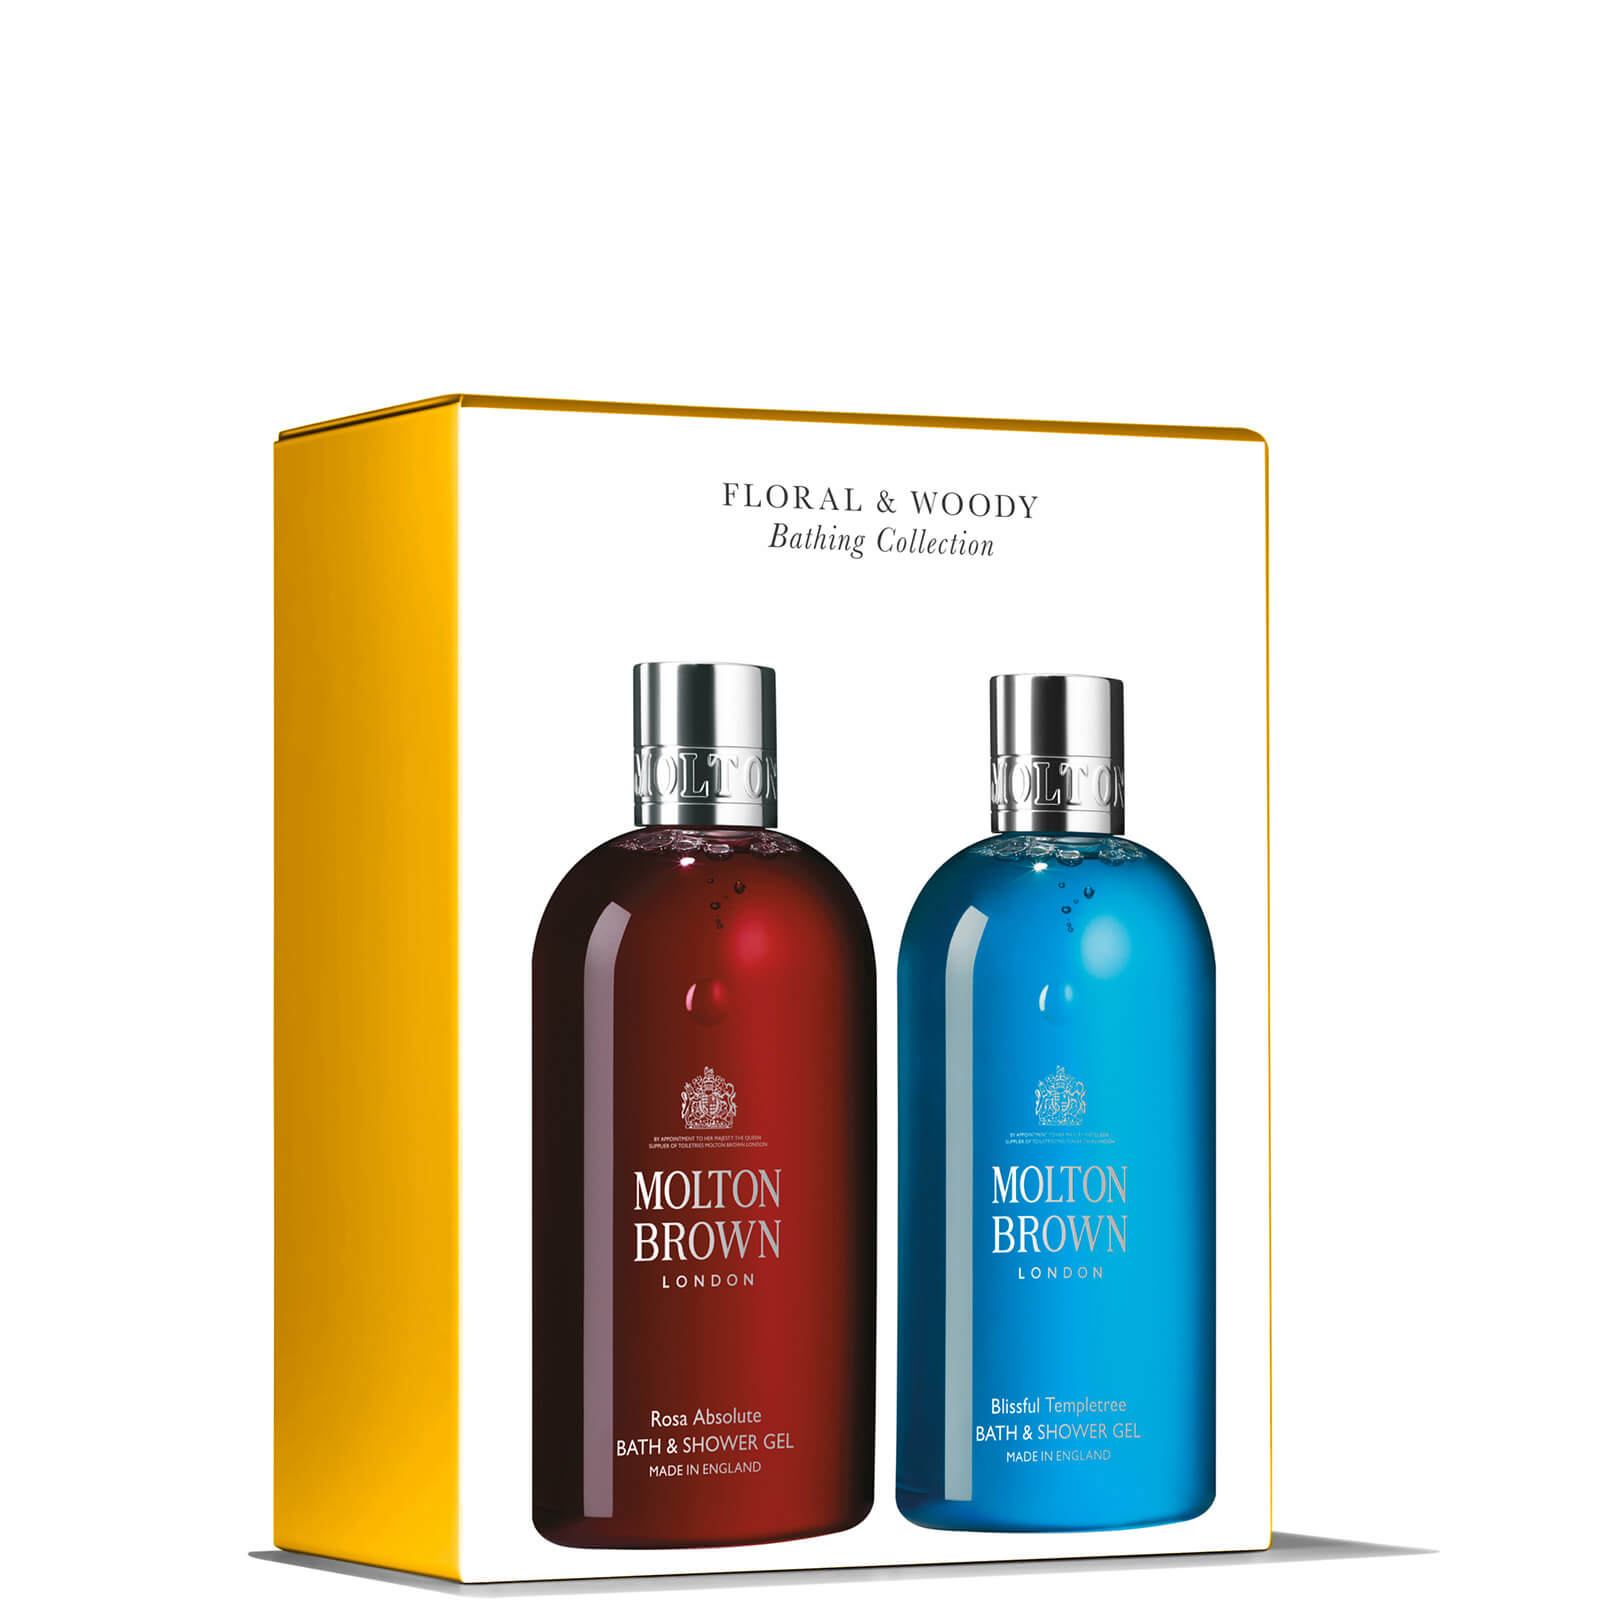 Molton Brown Floral and Woody Bathing Collection (Worth £44.00)